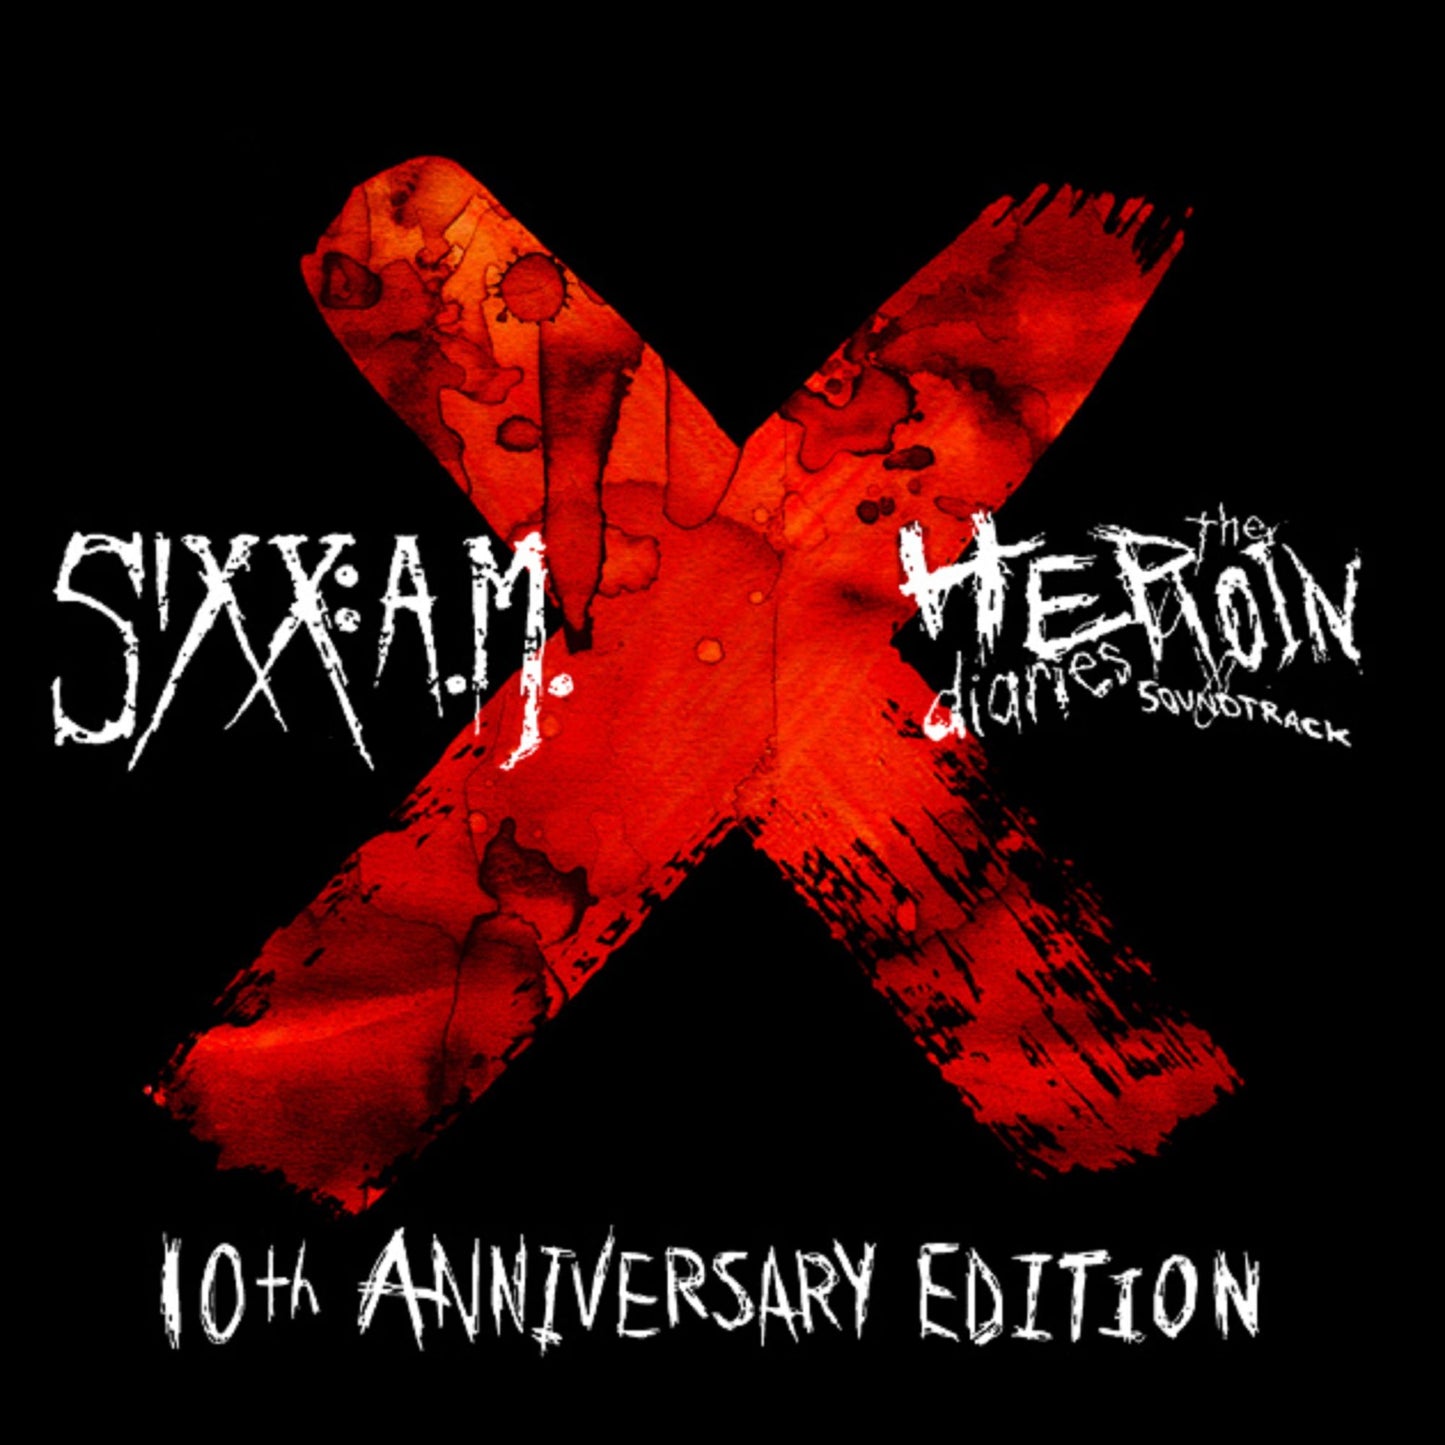 Sixx: A.M. - The Heroin Diaries Soundtrack - CD